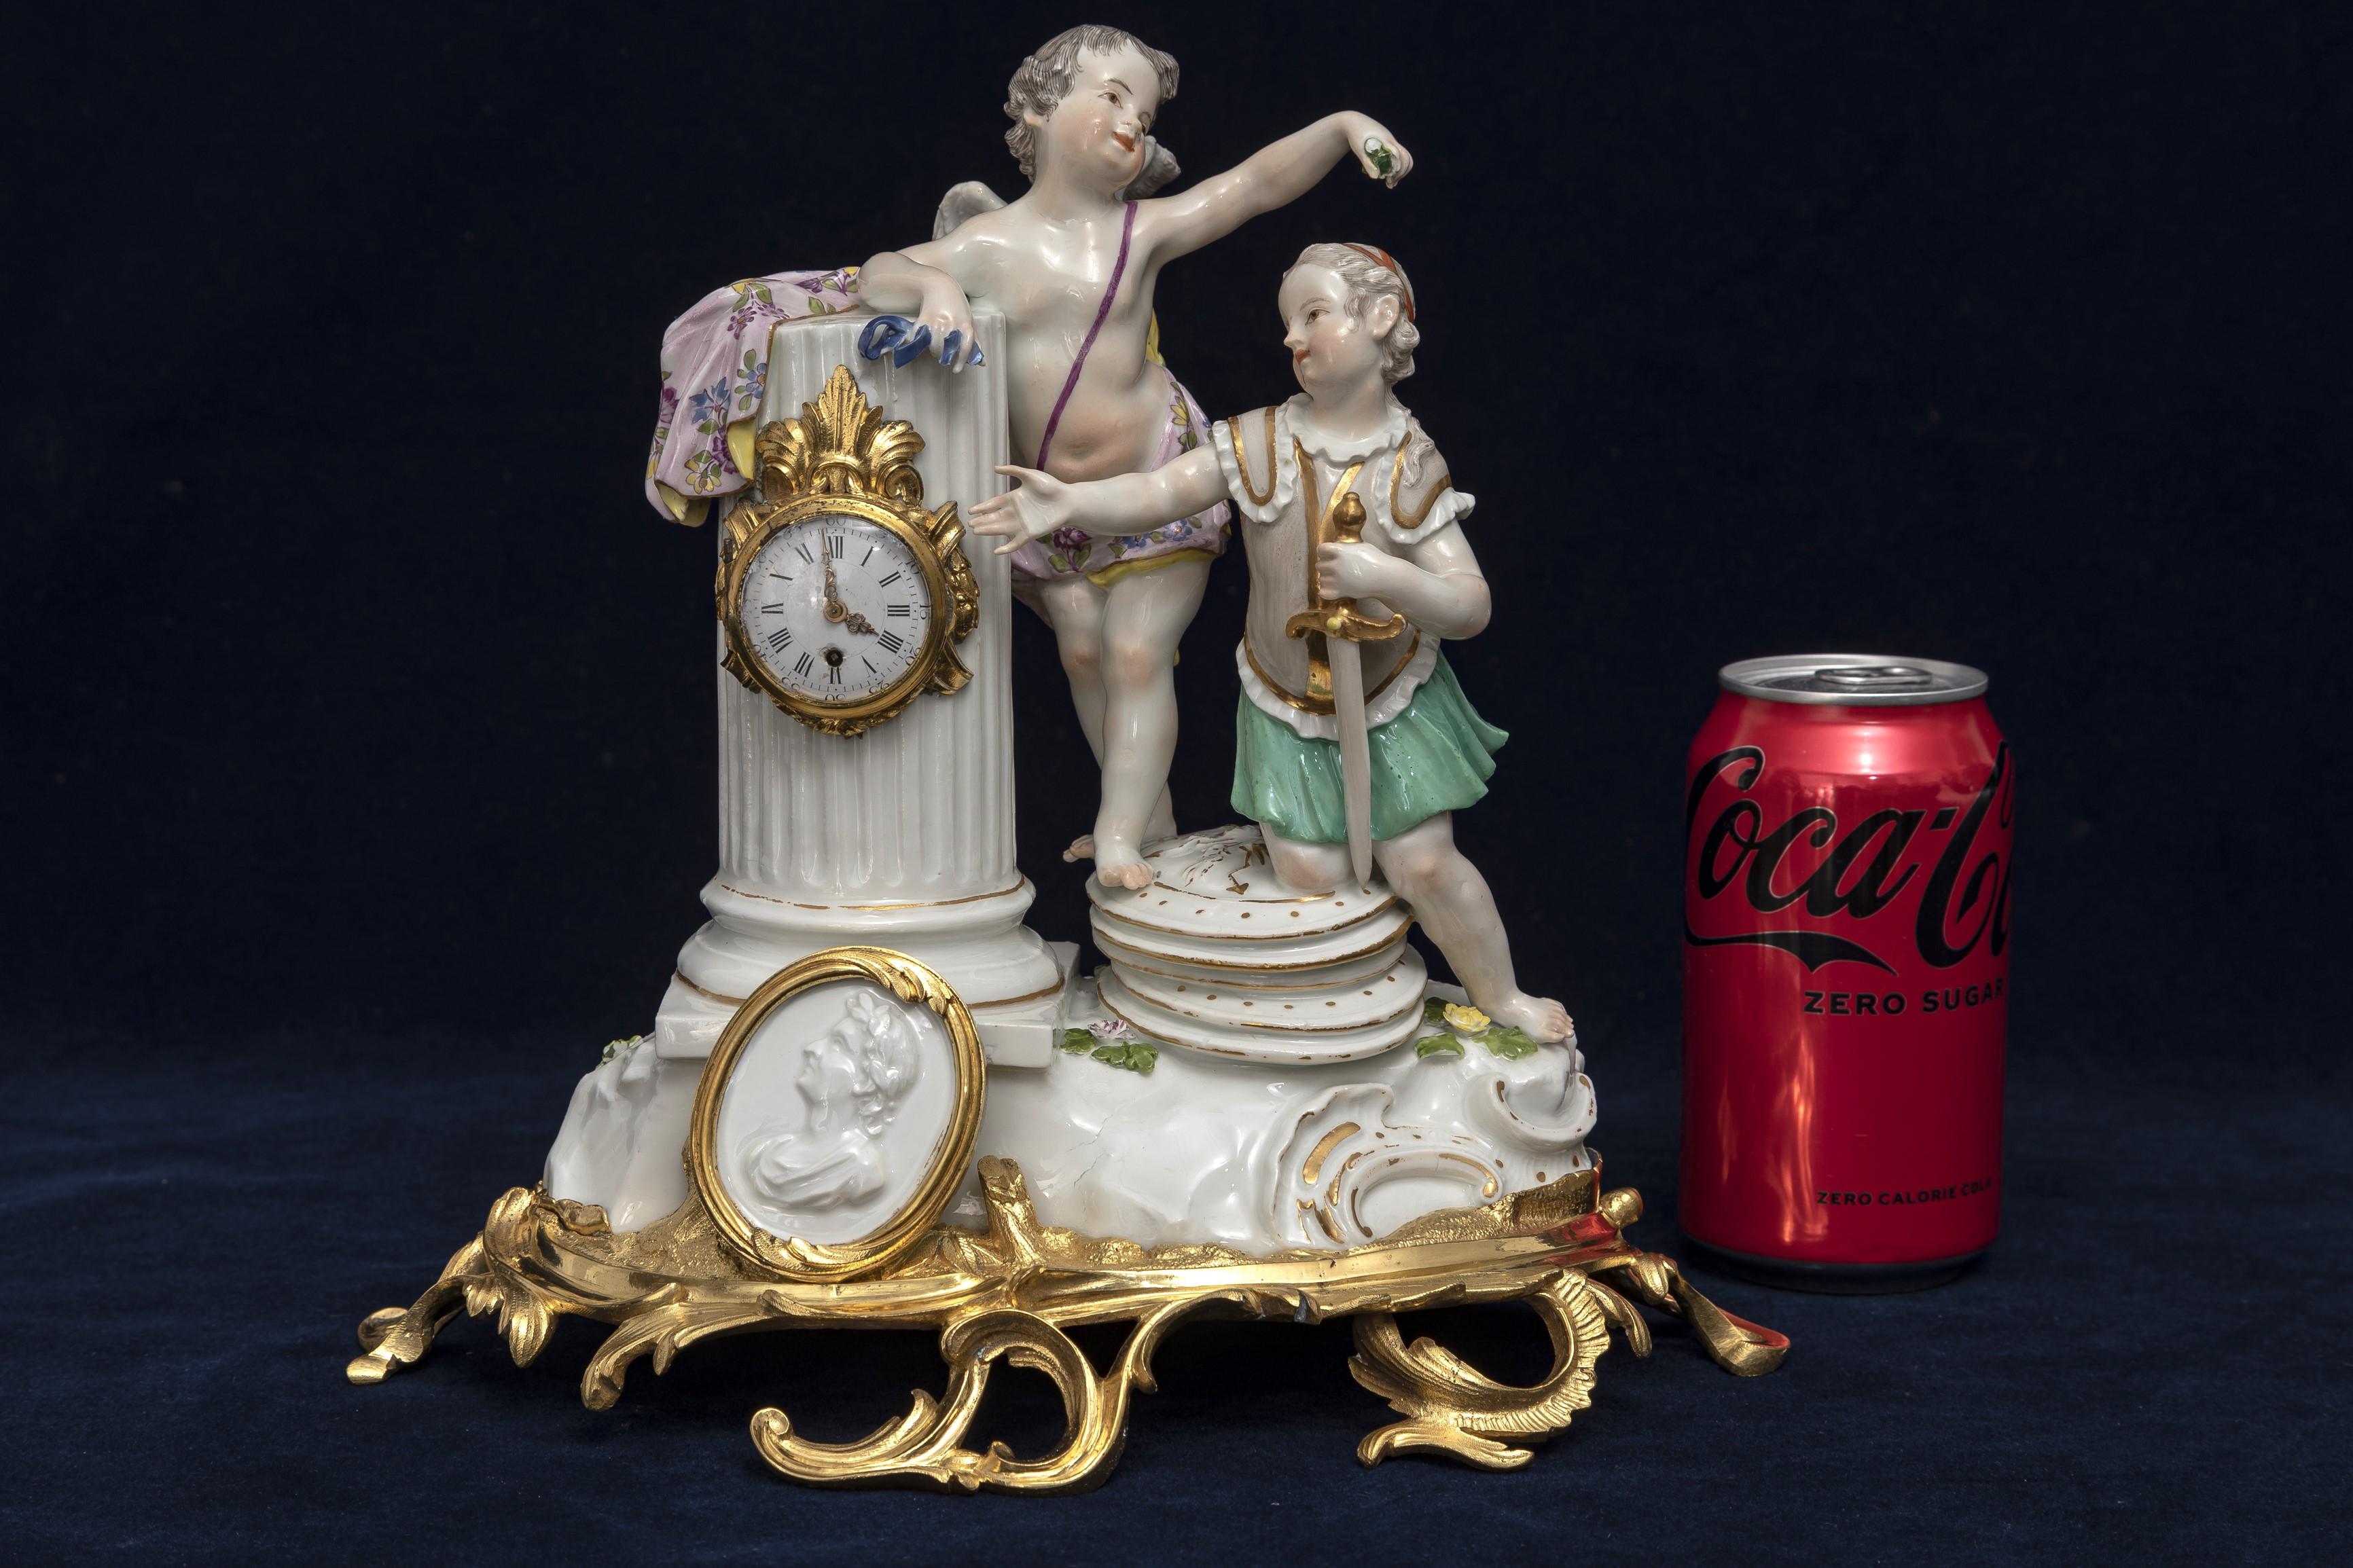 An Incredible and Quite Important 18th Century Ormolu Mounted Meissen Porcelain Putti Clock Grouping.  The composition is enriched with two putti positioned atop a porcelain naturalistic mound. One putti, clad in military attire, leans his knee